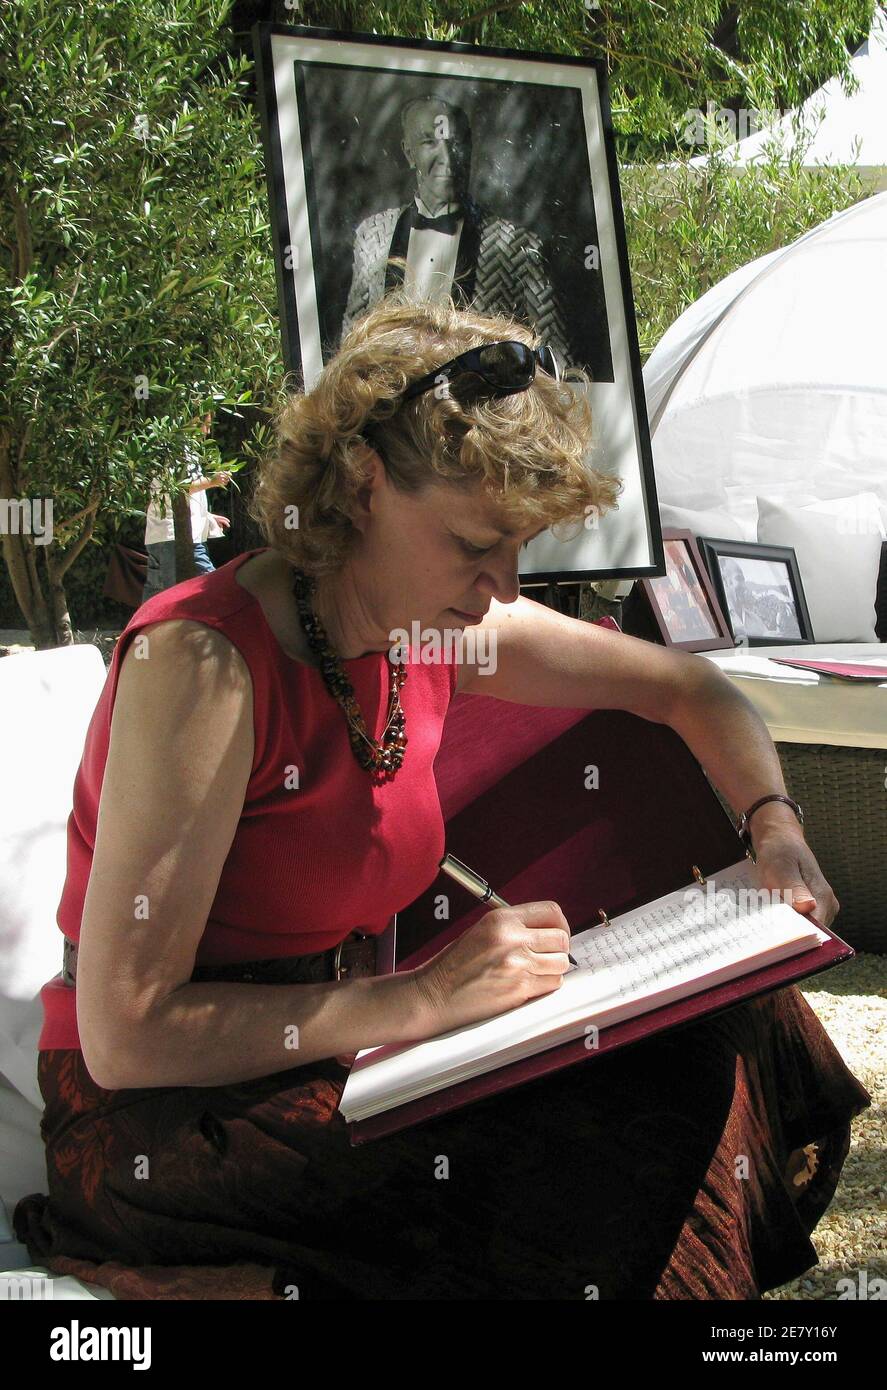 Vintner Linda Neal signs a guestbook at a memorial for winemaker Robert Mondavi (pictured rear), who died on May 16, at the 28th Auction Napa Valley in St Helena, California June 6, 2008. On the heels of an inauspicious 400-point plunge on the Dow Jones industrial average on Friday, Napa Valley vintners managed to raise $10.4 million for local charity, 5 percent more than last year and just shy of the record set in 2005.  Photo taken June 6, 2008. To match feature USA-WINE/    REUTERS/Mary Milliken (UNITED STATES) Stock Photo